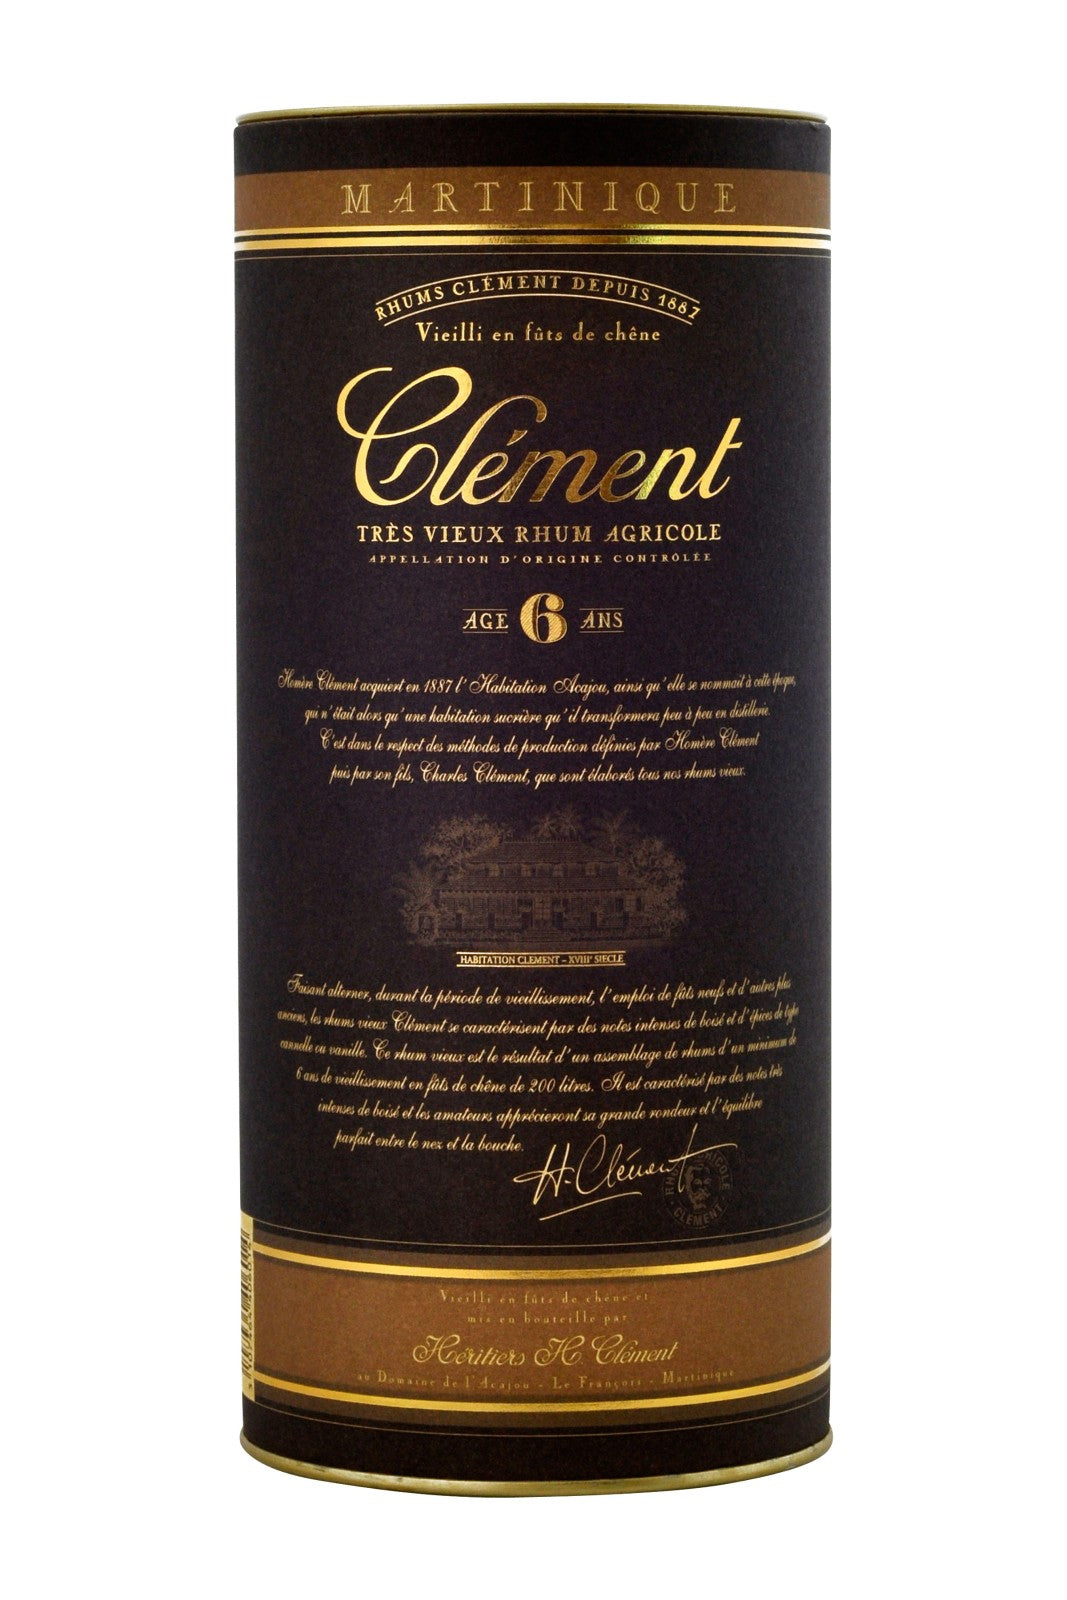 Clement Age 6 Rum